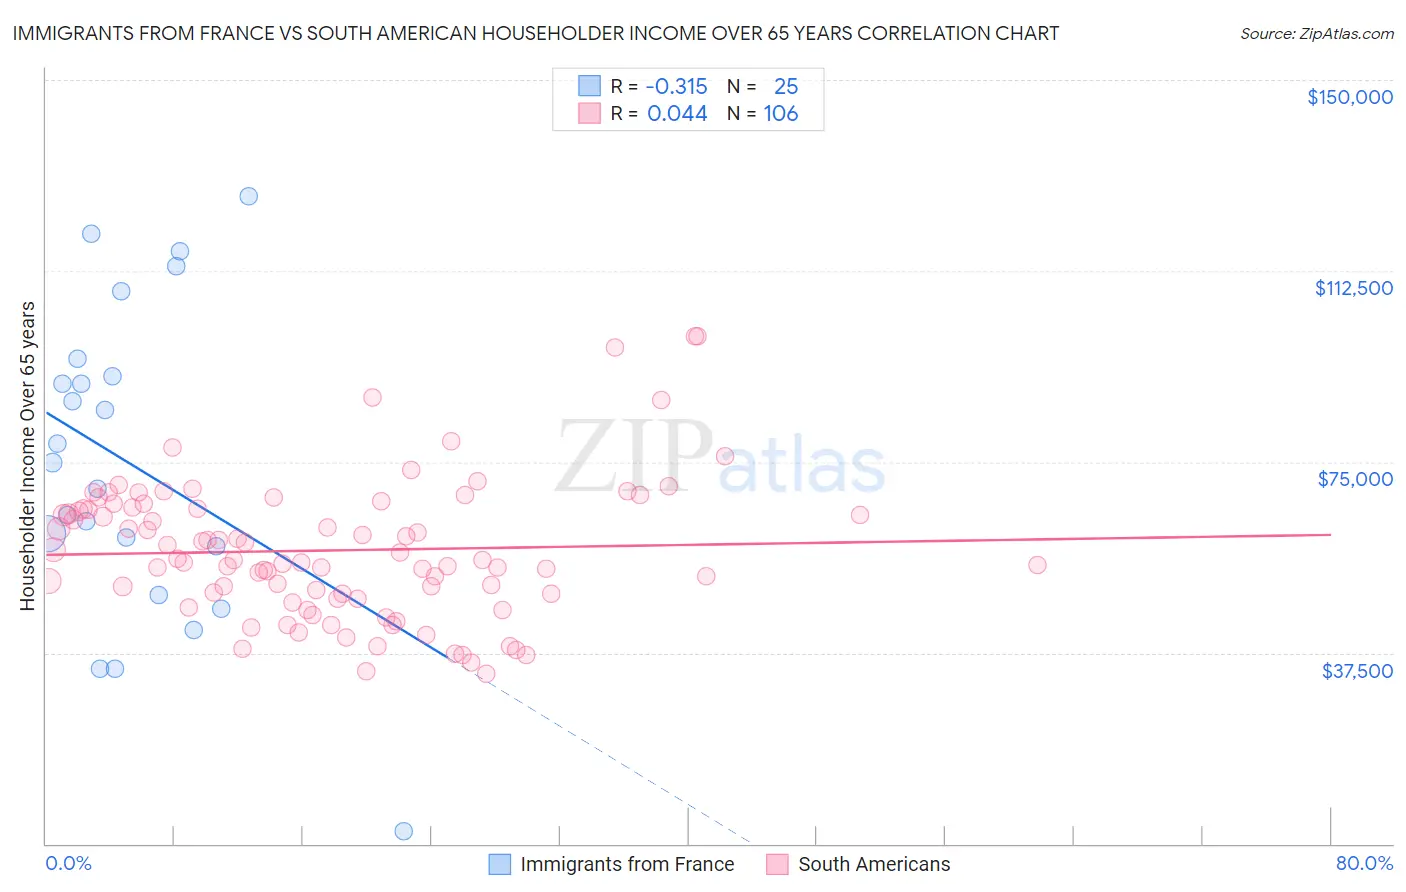 Immigrants from France vs South American Householder Income Over 65 years